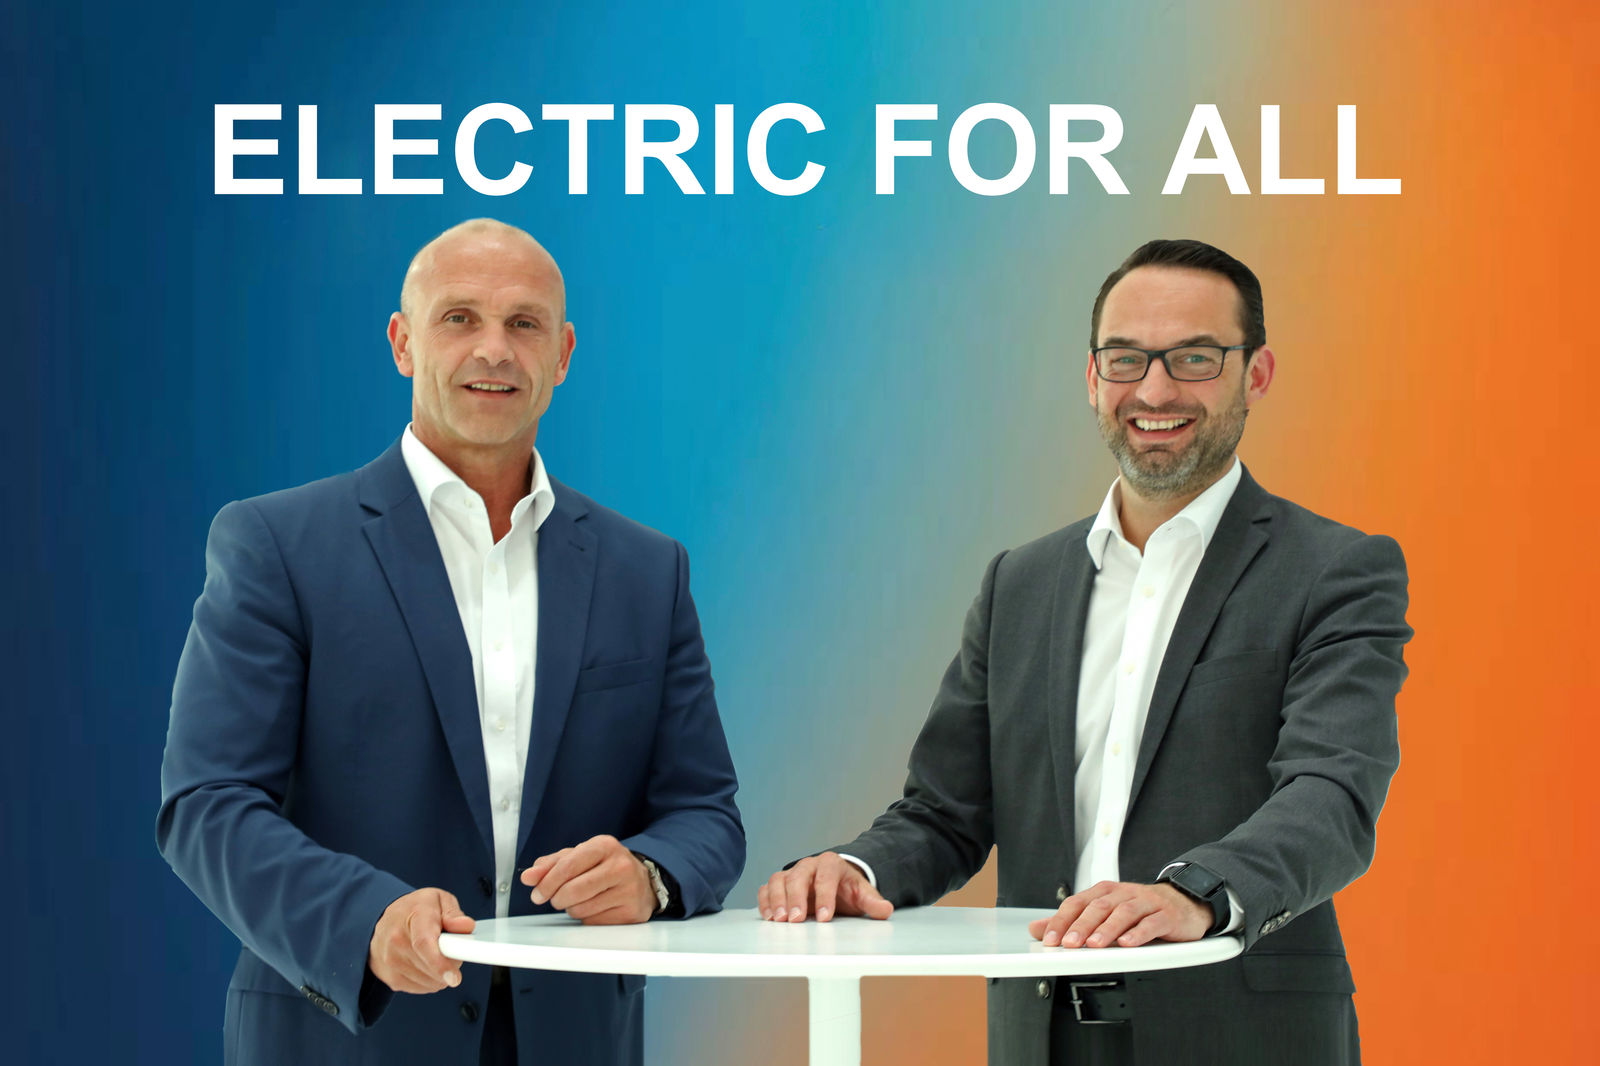 Electric for all - Interview Ulbrich and Senger